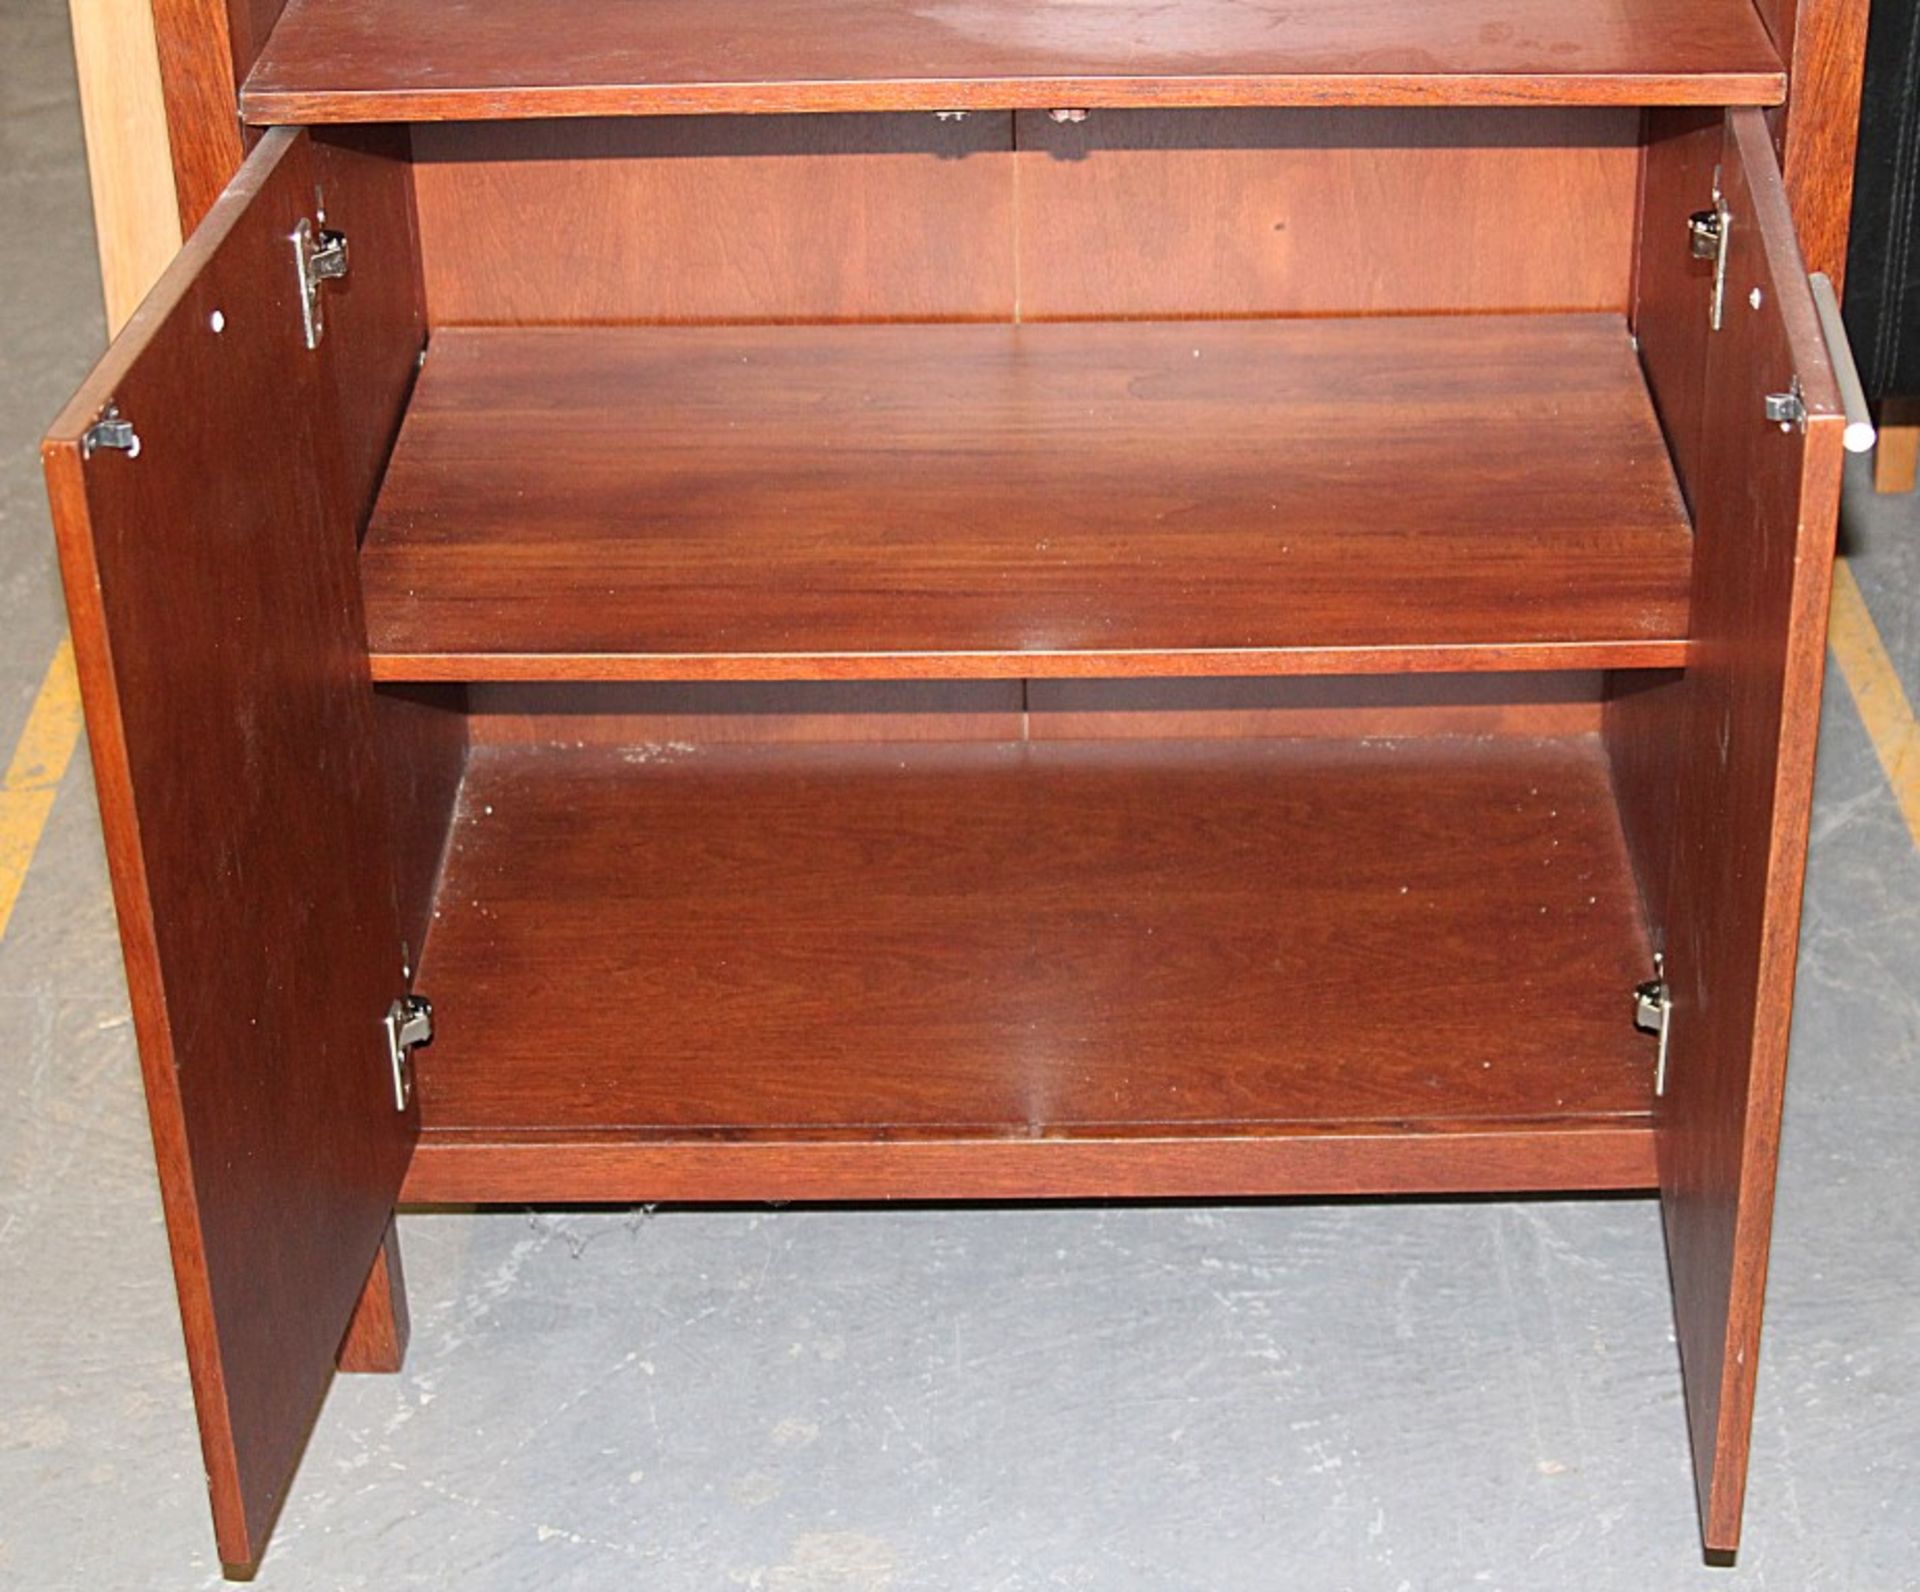 1 x Mahogany 3ft Tall 2 Door / 2 Shelf Unit With Glass Shelves – Ref CH017 – Ex Display Stock In - Image 2 of 3